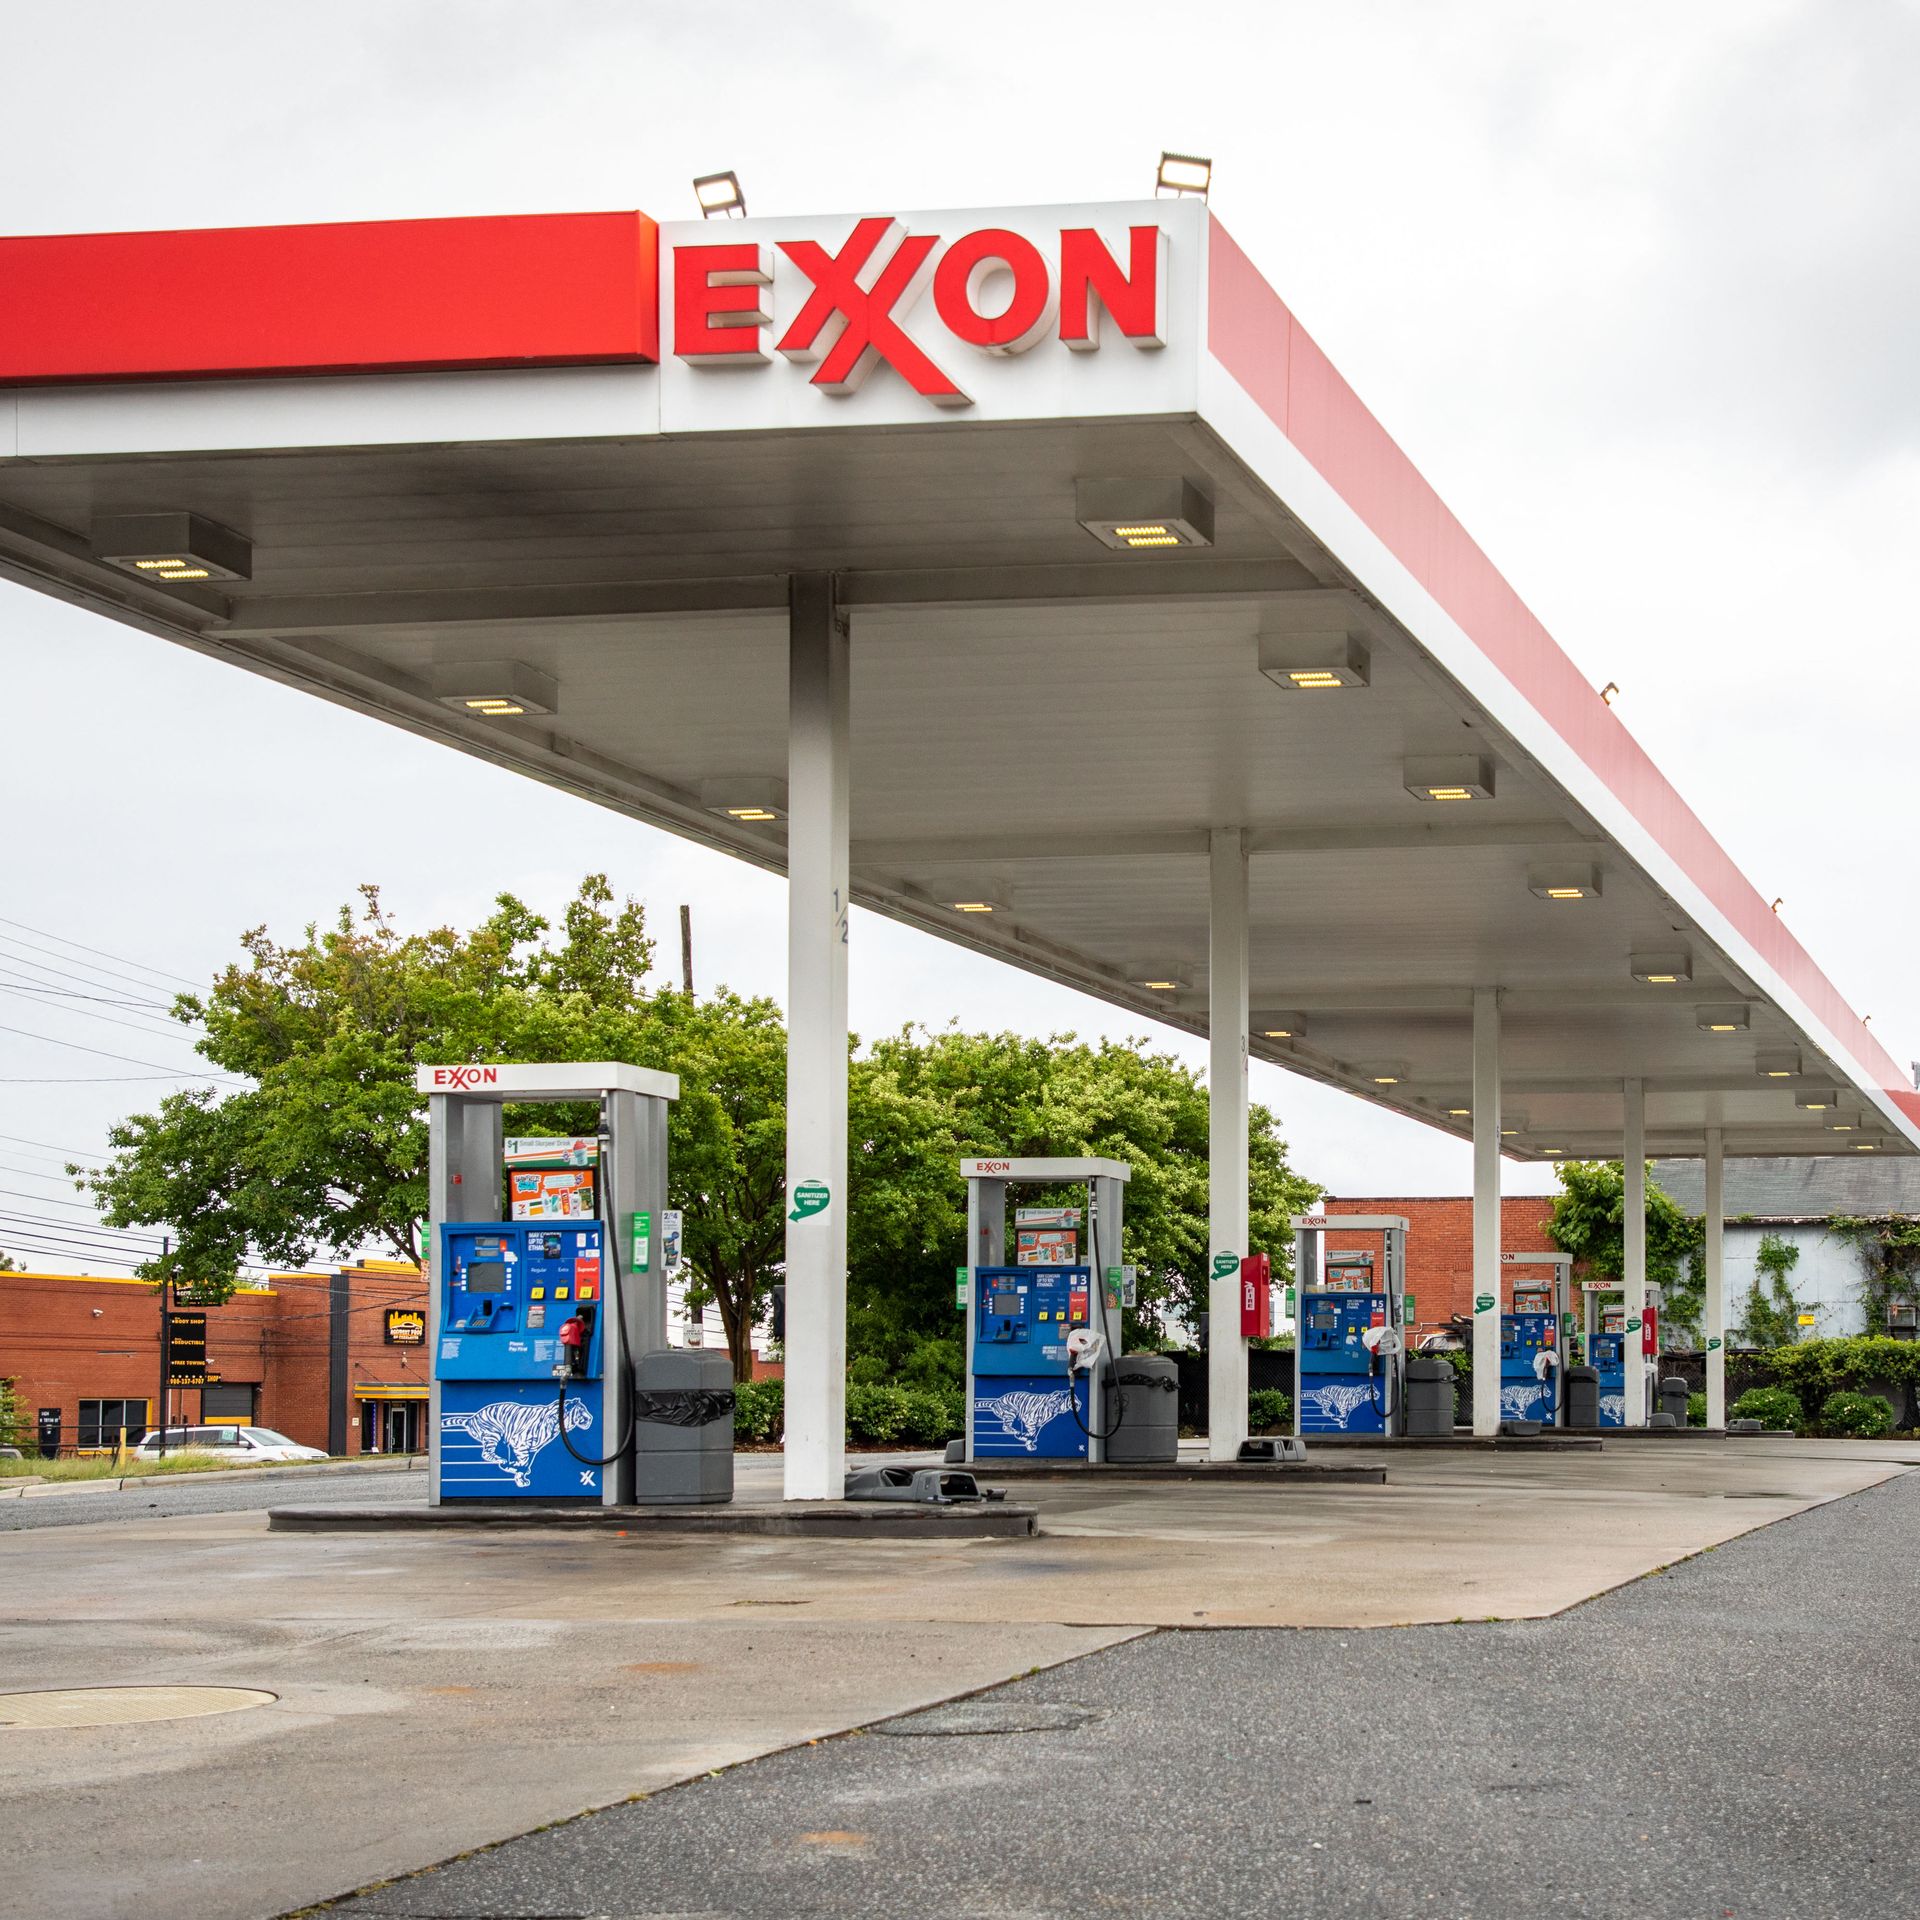 Exxon Mobil gas station without any cars.